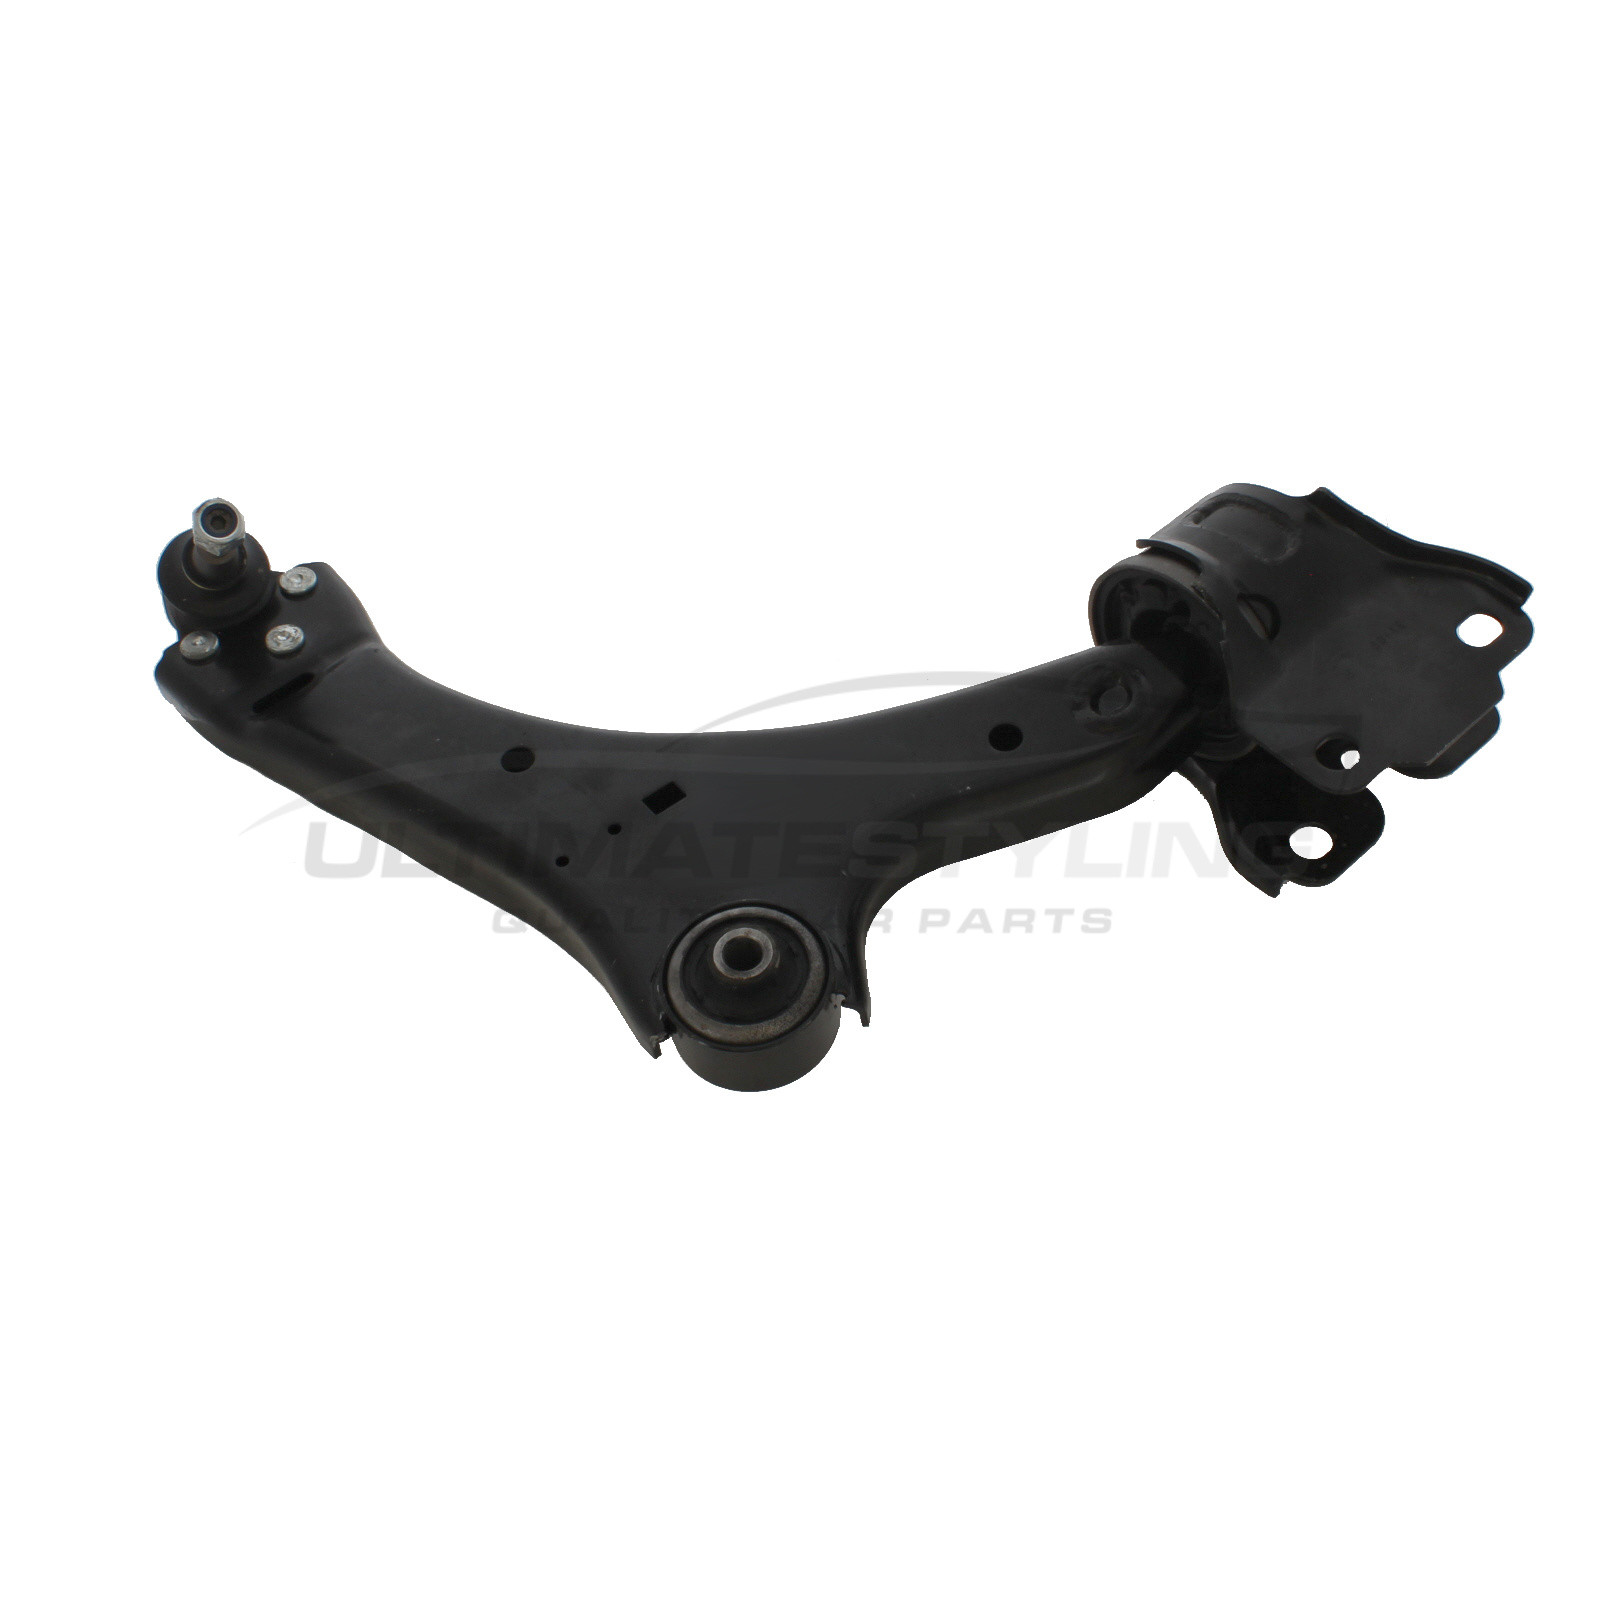 Ford Galaxy 2006-2016, Ford Mondeo 2007-2011, Ford S-MAX 2006-2011, Volvo S60 2010-2017, Volvo S80 2006-2017, Volvo V60 2010-2018, Volvo V70 2007-2017 Front Lower Suspension Arm (Steel) Including Ball Joint and Rear Bush Driver Side (RH)